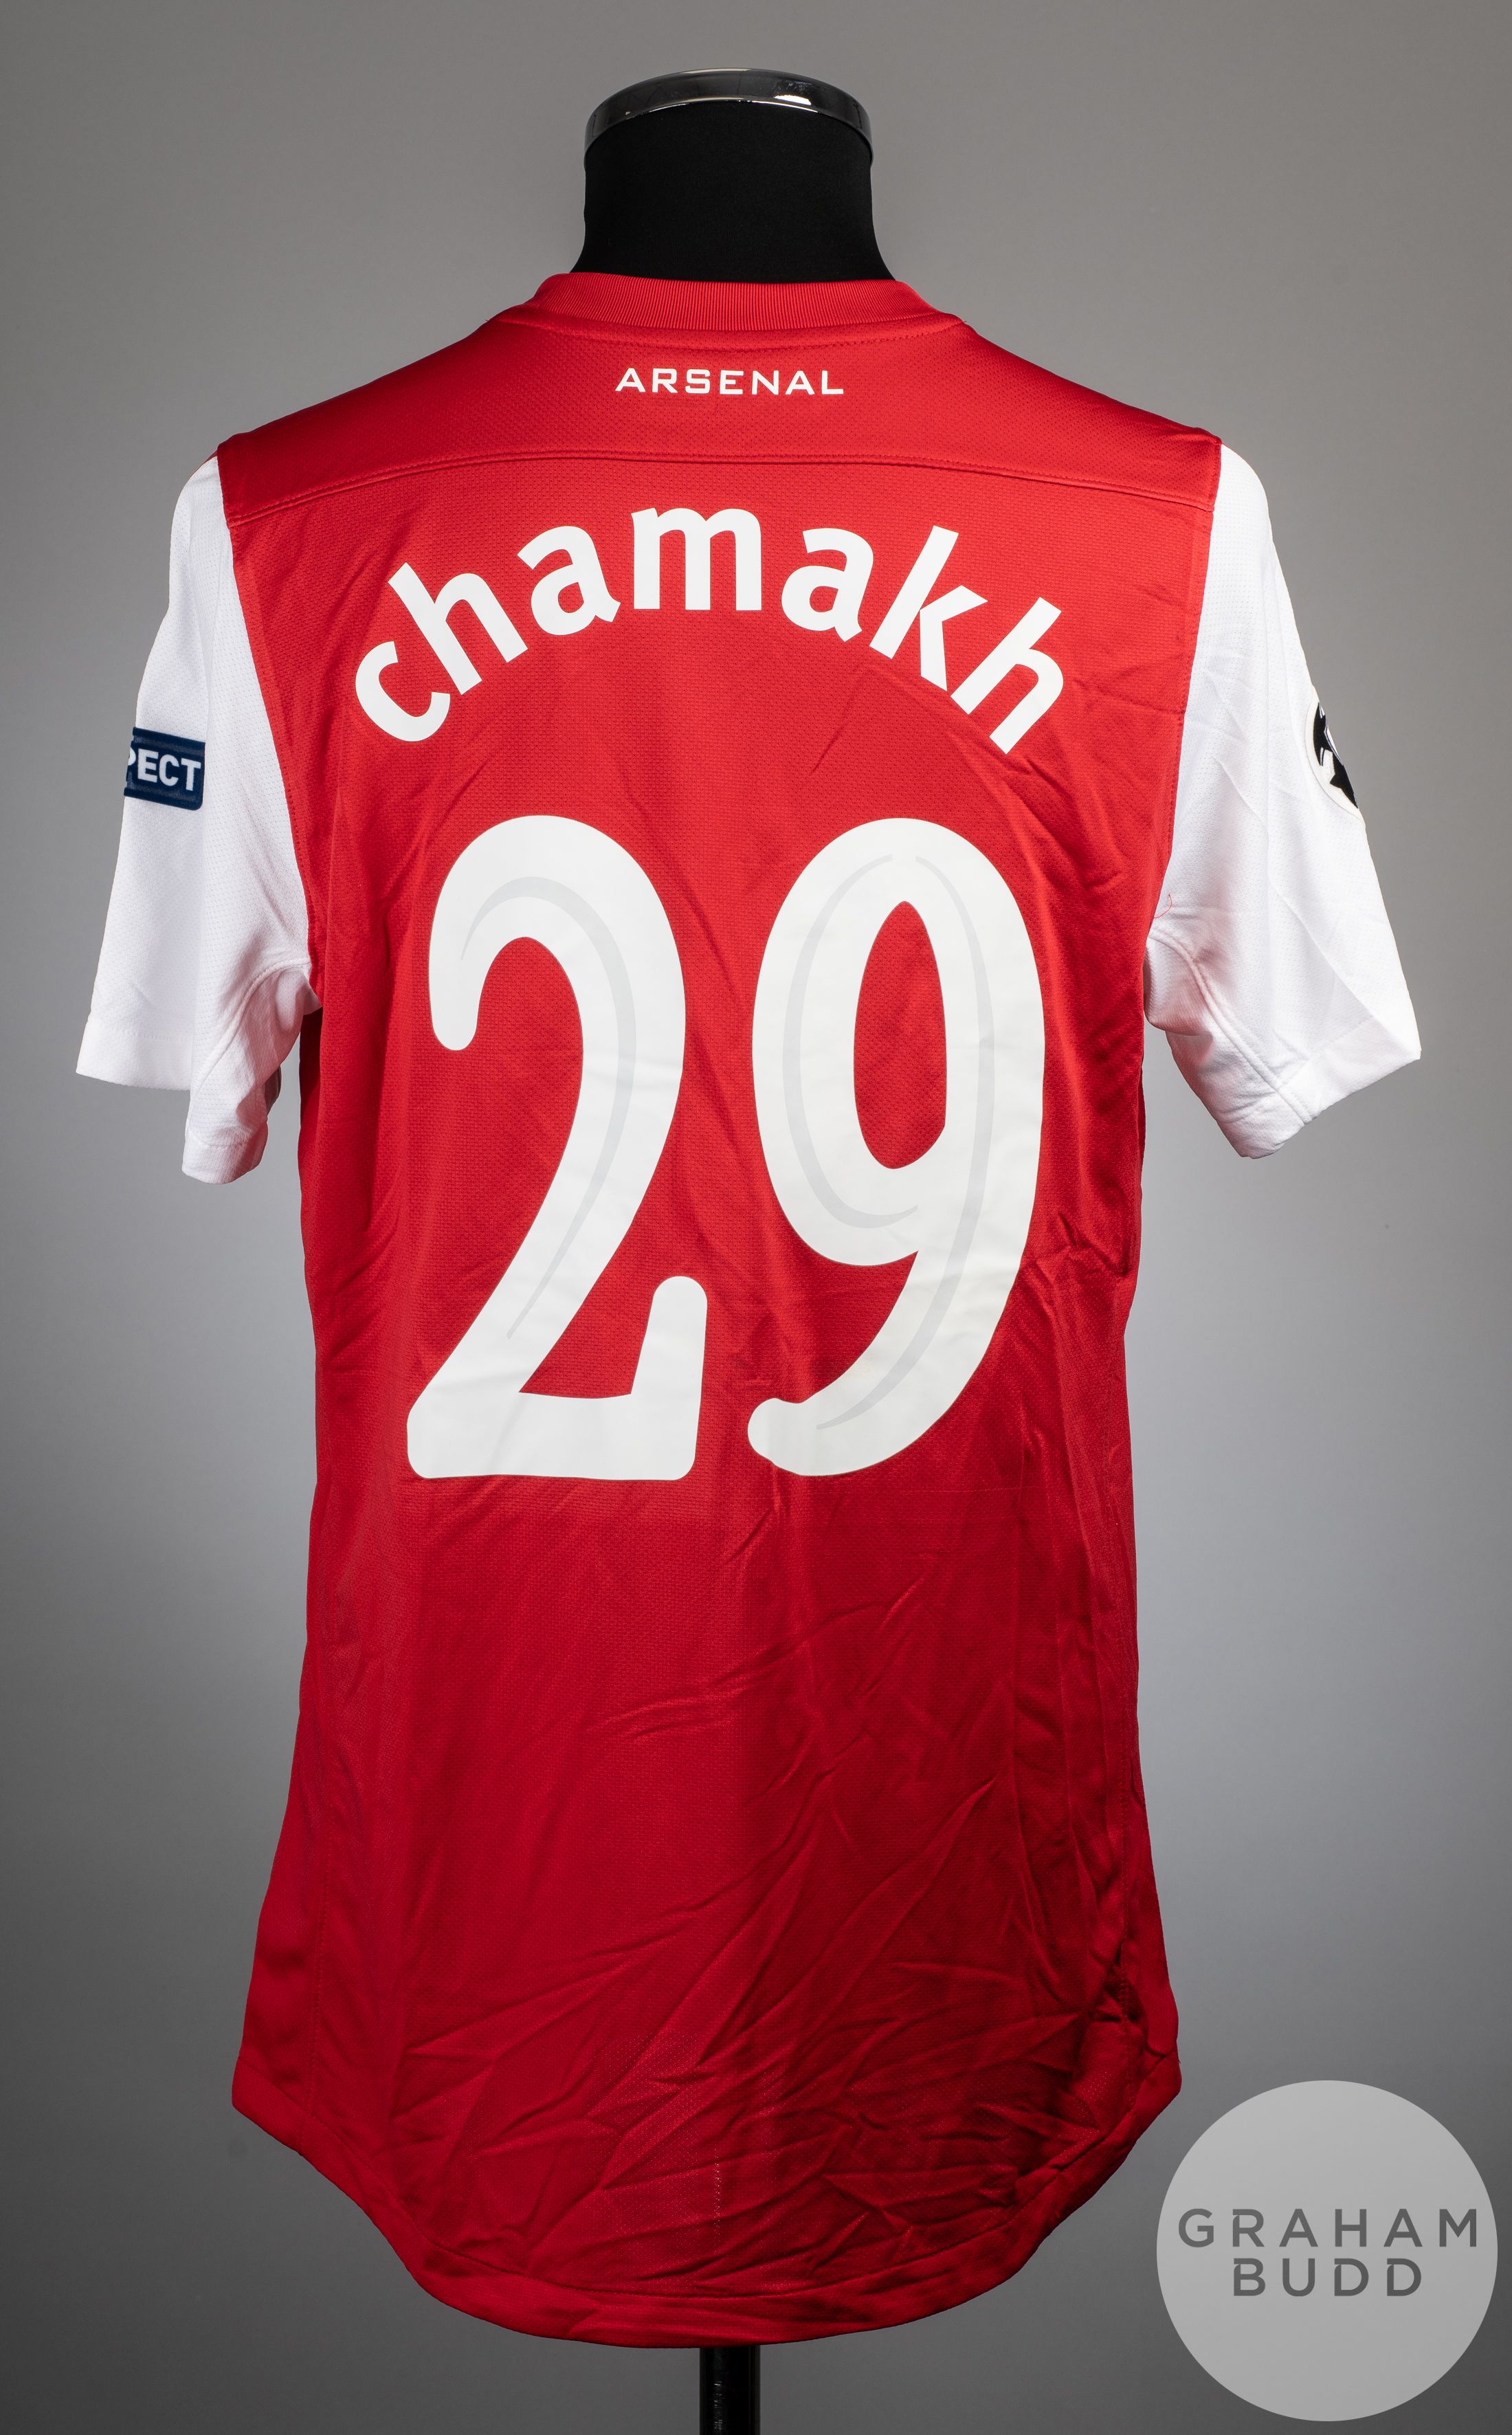 Marouane Chamakh red No.29 Arsenal Champions League short-sleeved shirt, 2011-12 - Image 2 of 2